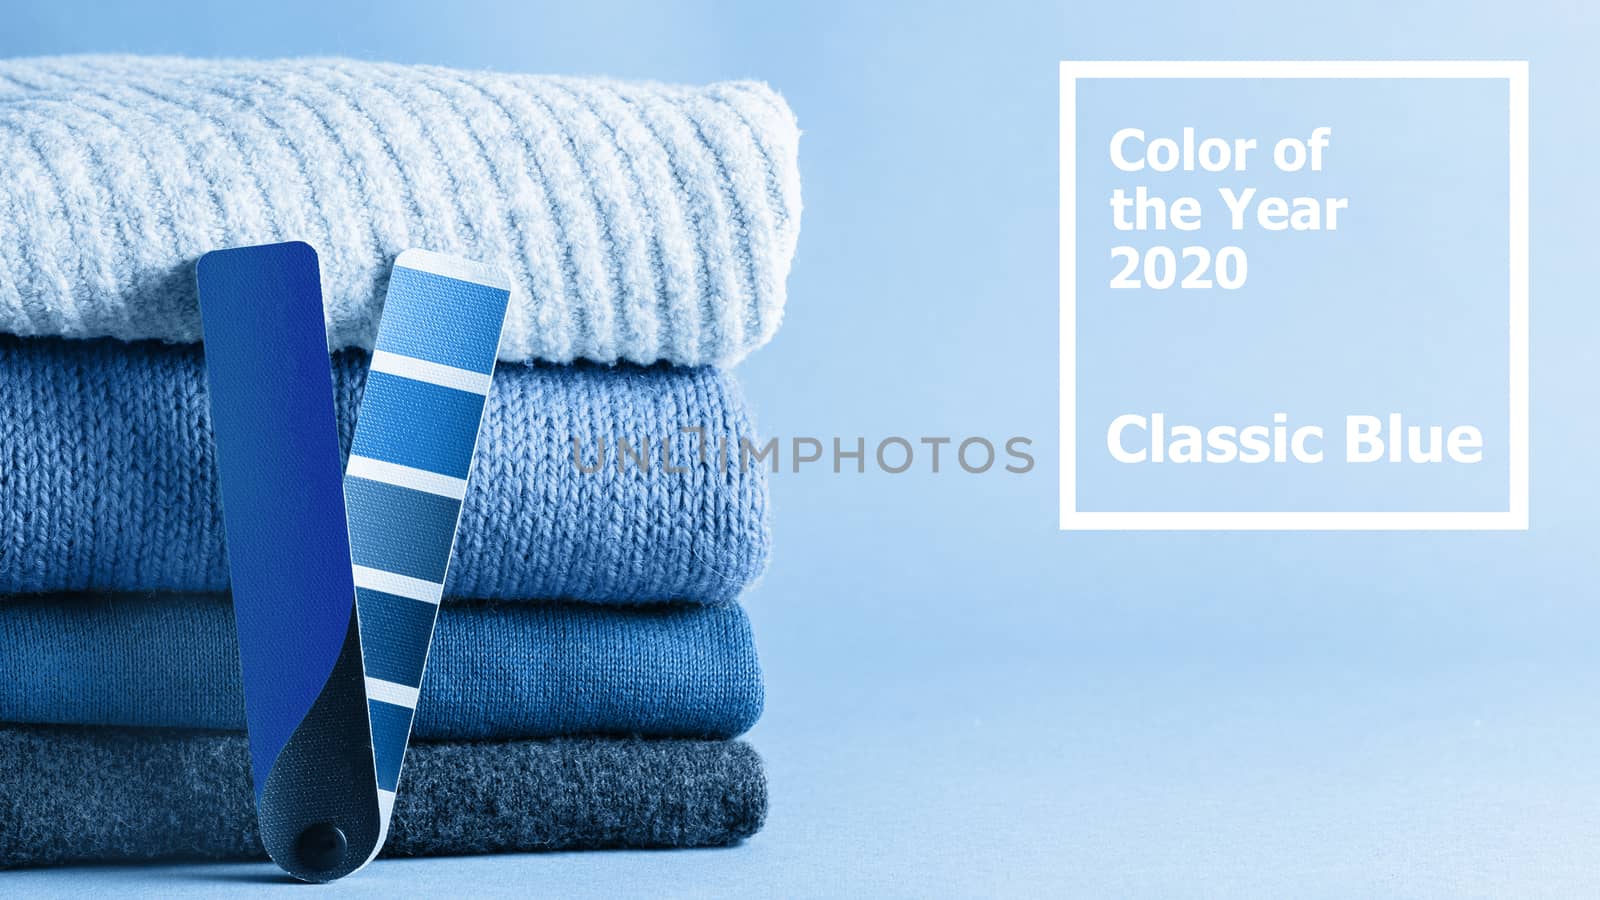 Stack of sweaters and color fun palette in classic blue 2020 color. Color of year 2020 concept for fashion and clothing industry. Banner